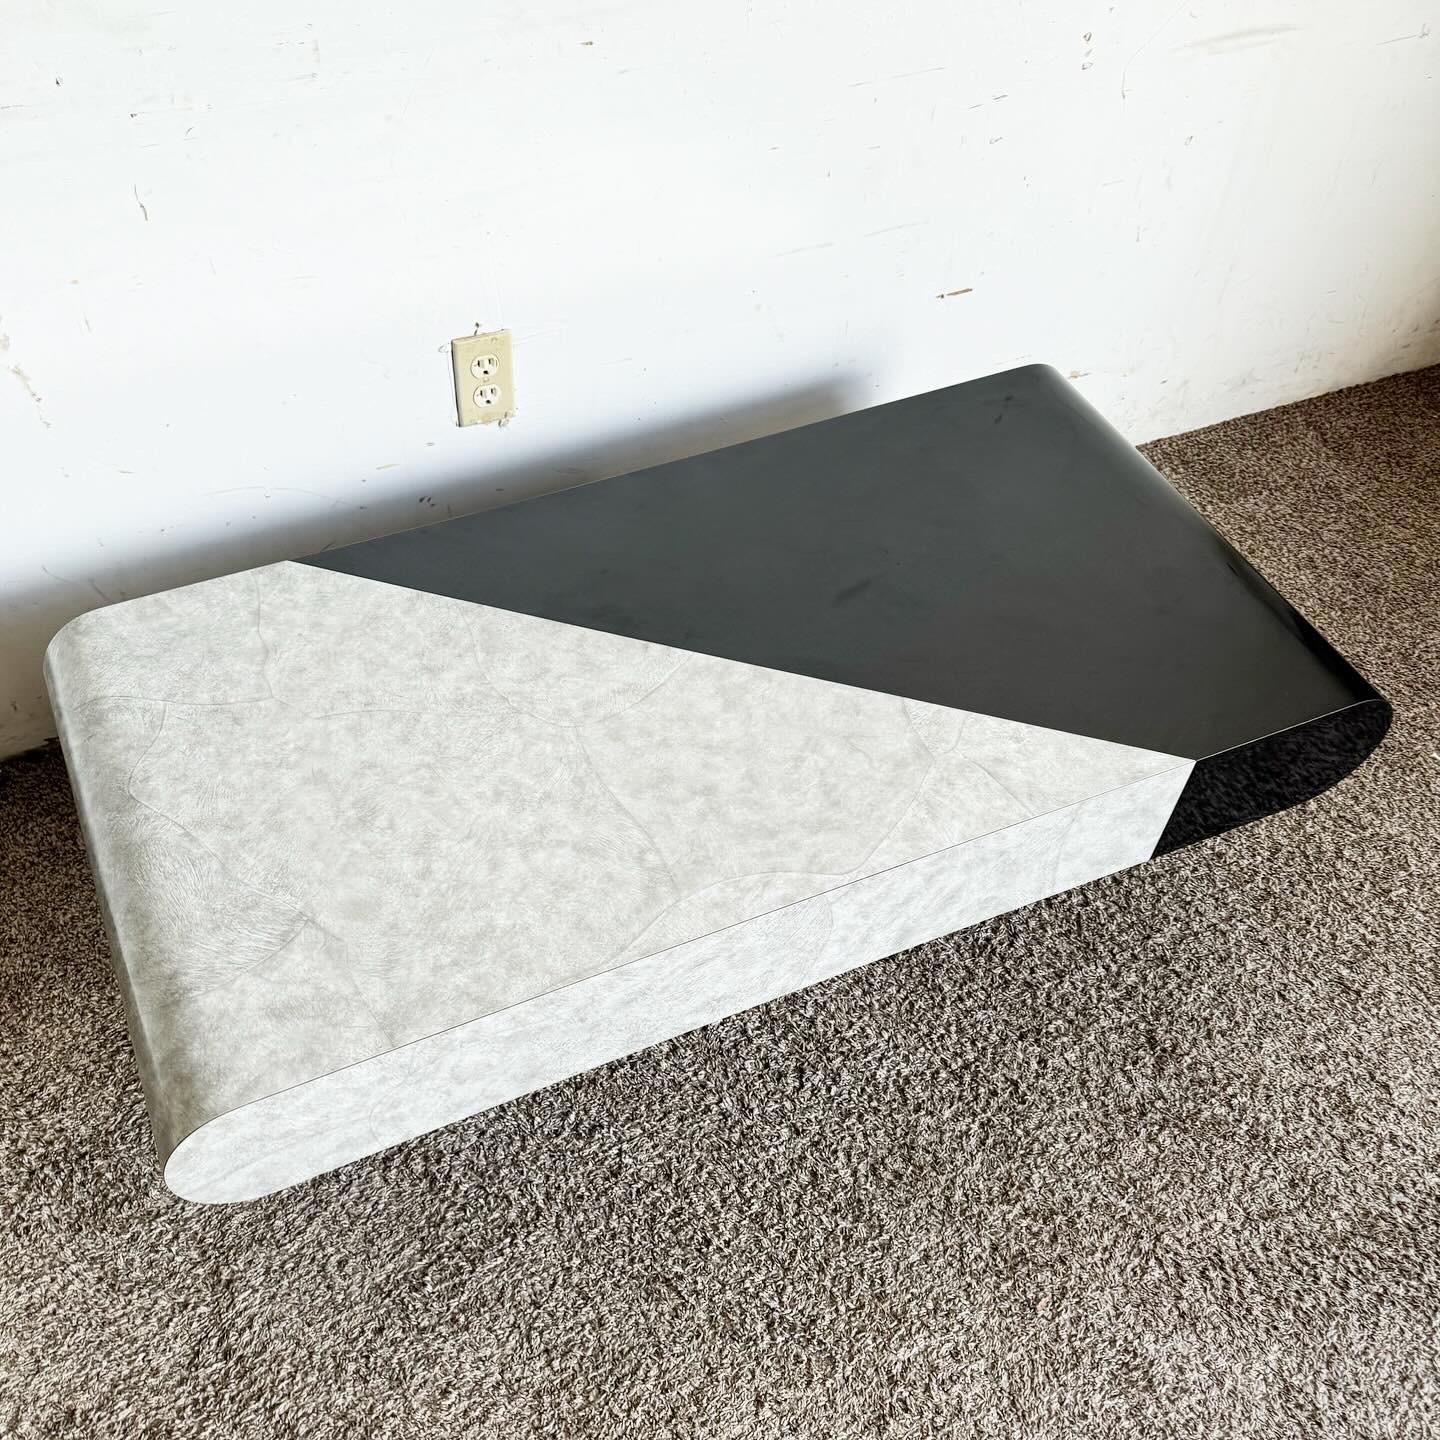 Late 20th Century Postmodern Black Gloss and Faux Stone Laminate Bullnose Coffee Table For Sale